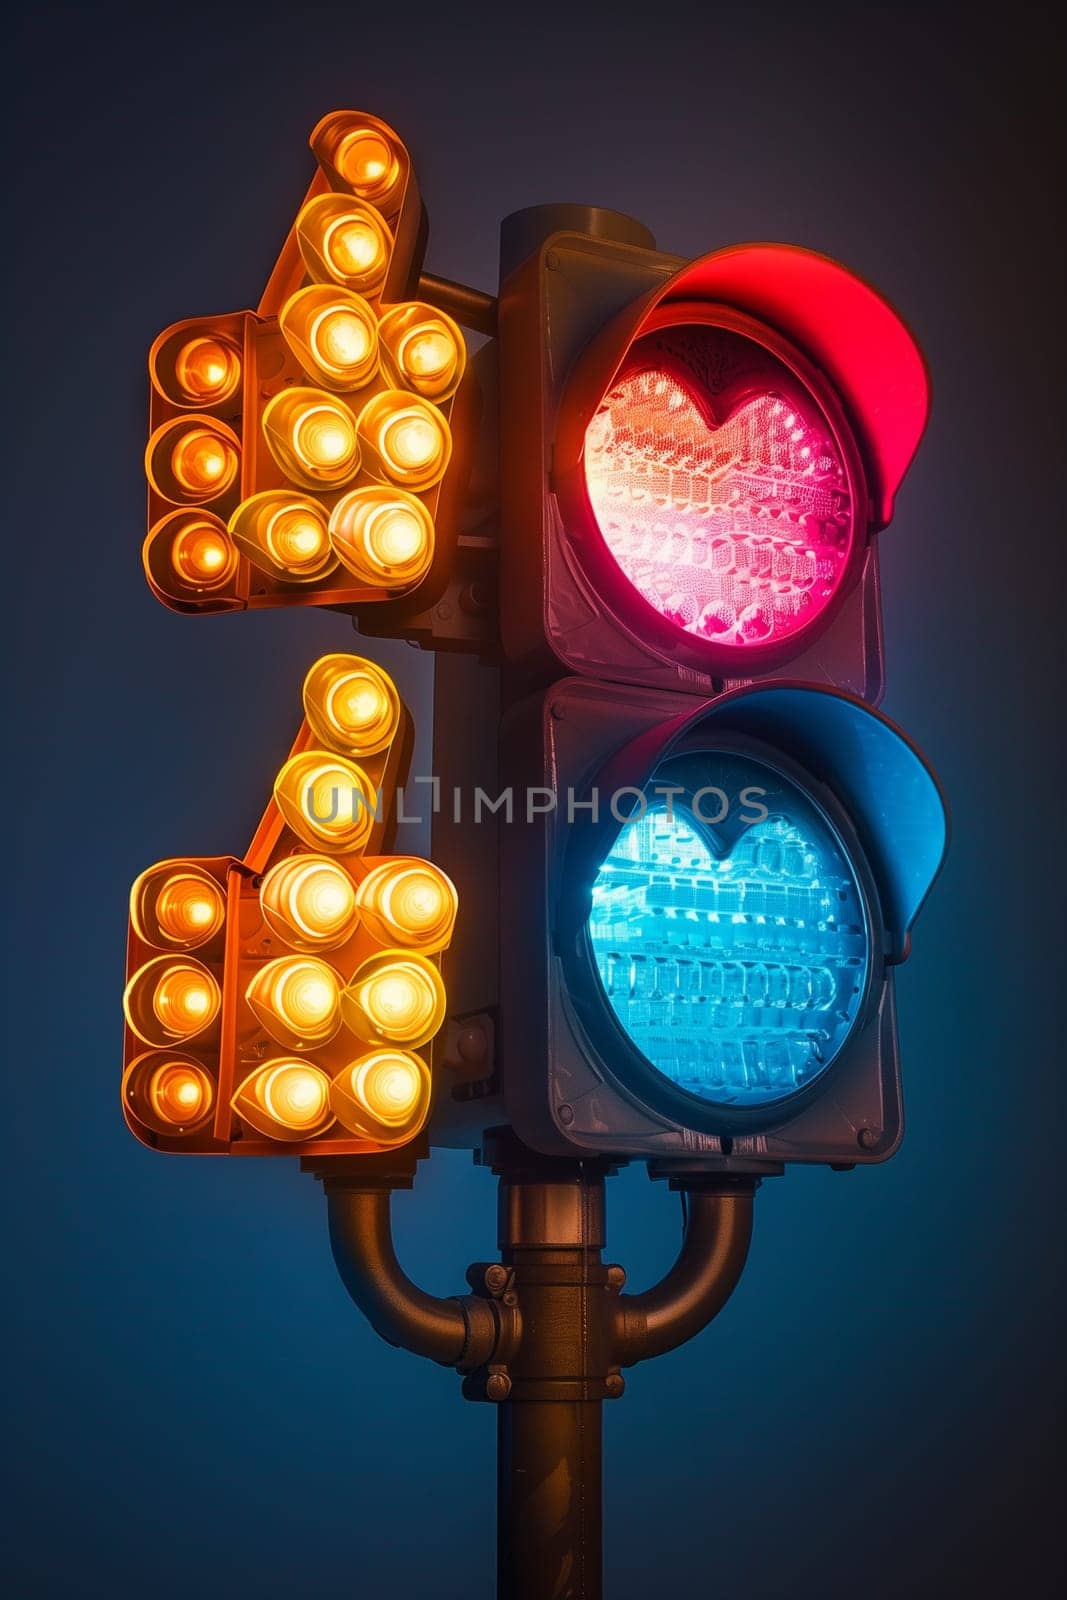 A traffic light displaying a heart symbol, symbolizing love and safety in the midst of urban traffic regulations.